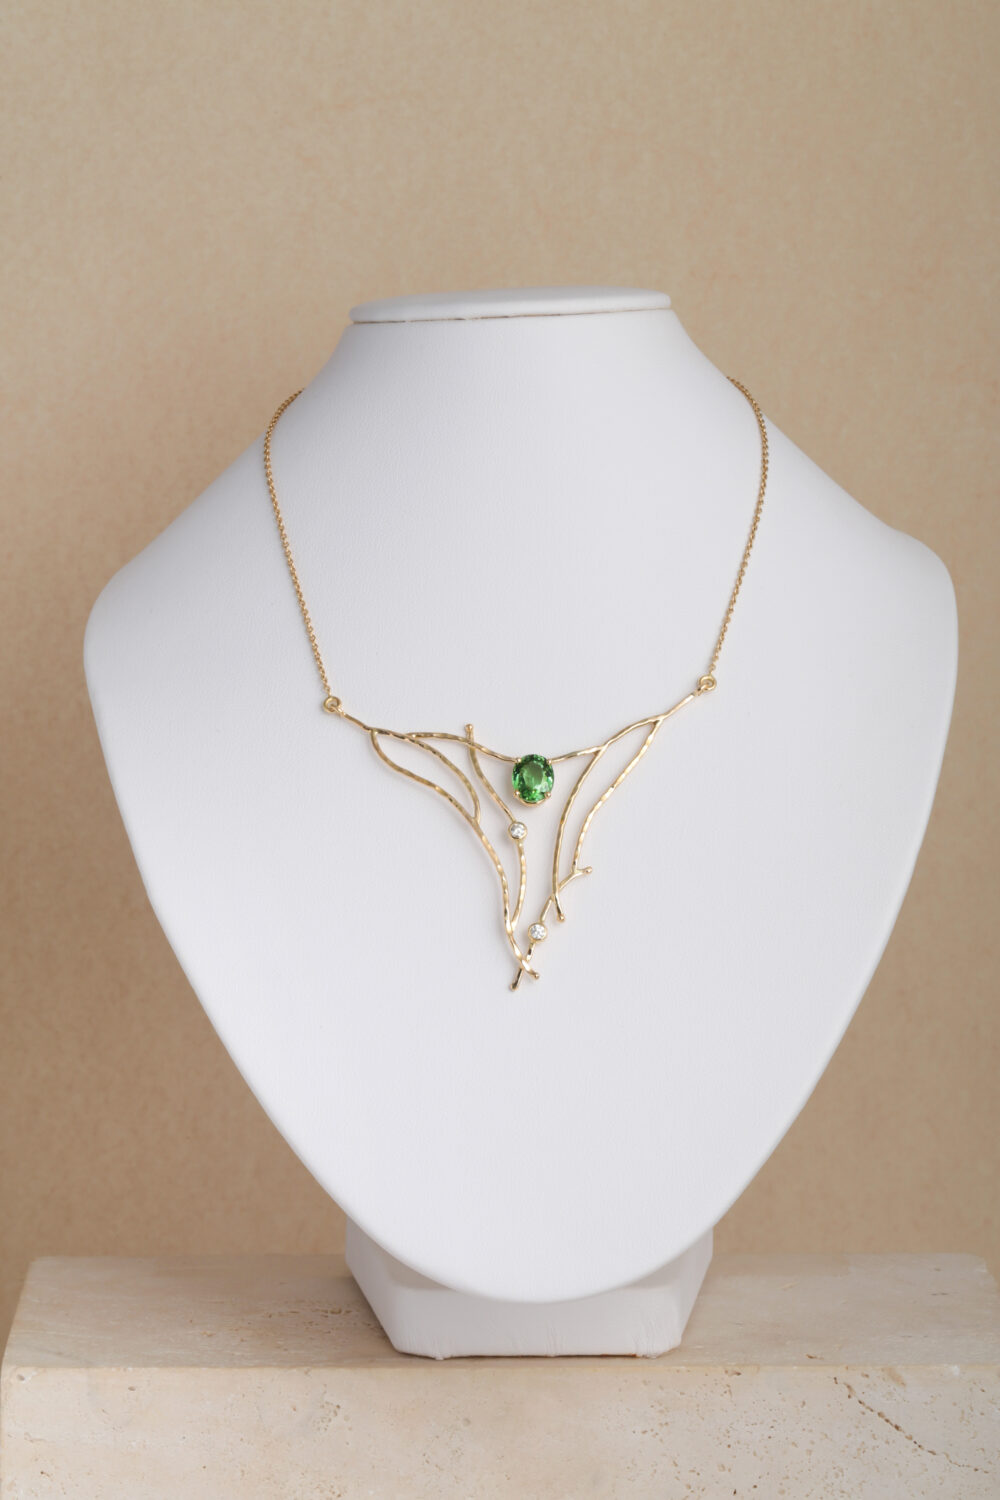 Diamond and Tourmaline necklace crafted from 18- karat gold set with an oval Tourmaline gemstone and diamonds by jewellery designer Pascale Masselis